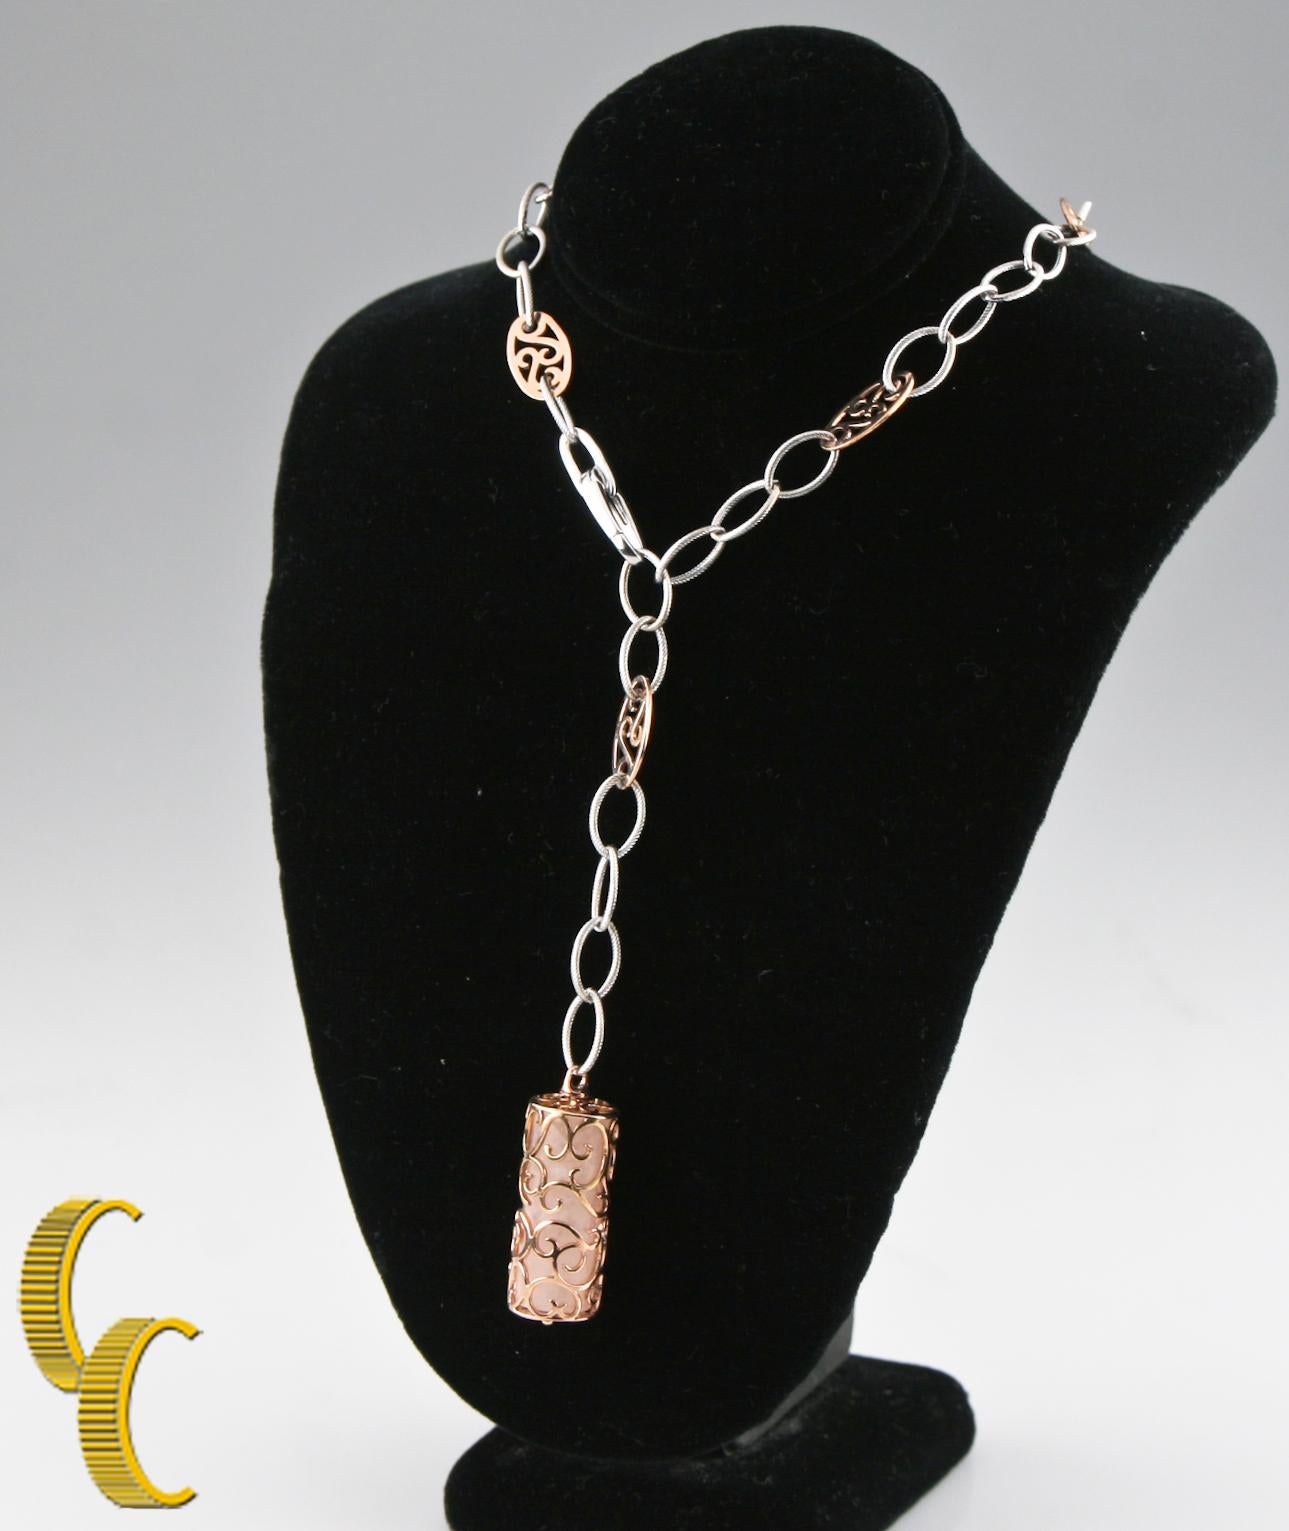 Gorgeous, Unique 14k Gold Necklace
Features White Gold Cable Chain w/ Ornate Rose Gold Accent Chains
Features Rose Gold Cylinder Container w/ Gorgeous, Marbled Pink Coral Contained Within
Dimensions of Container = 27 mm Long x 11 mm Diameter
Total